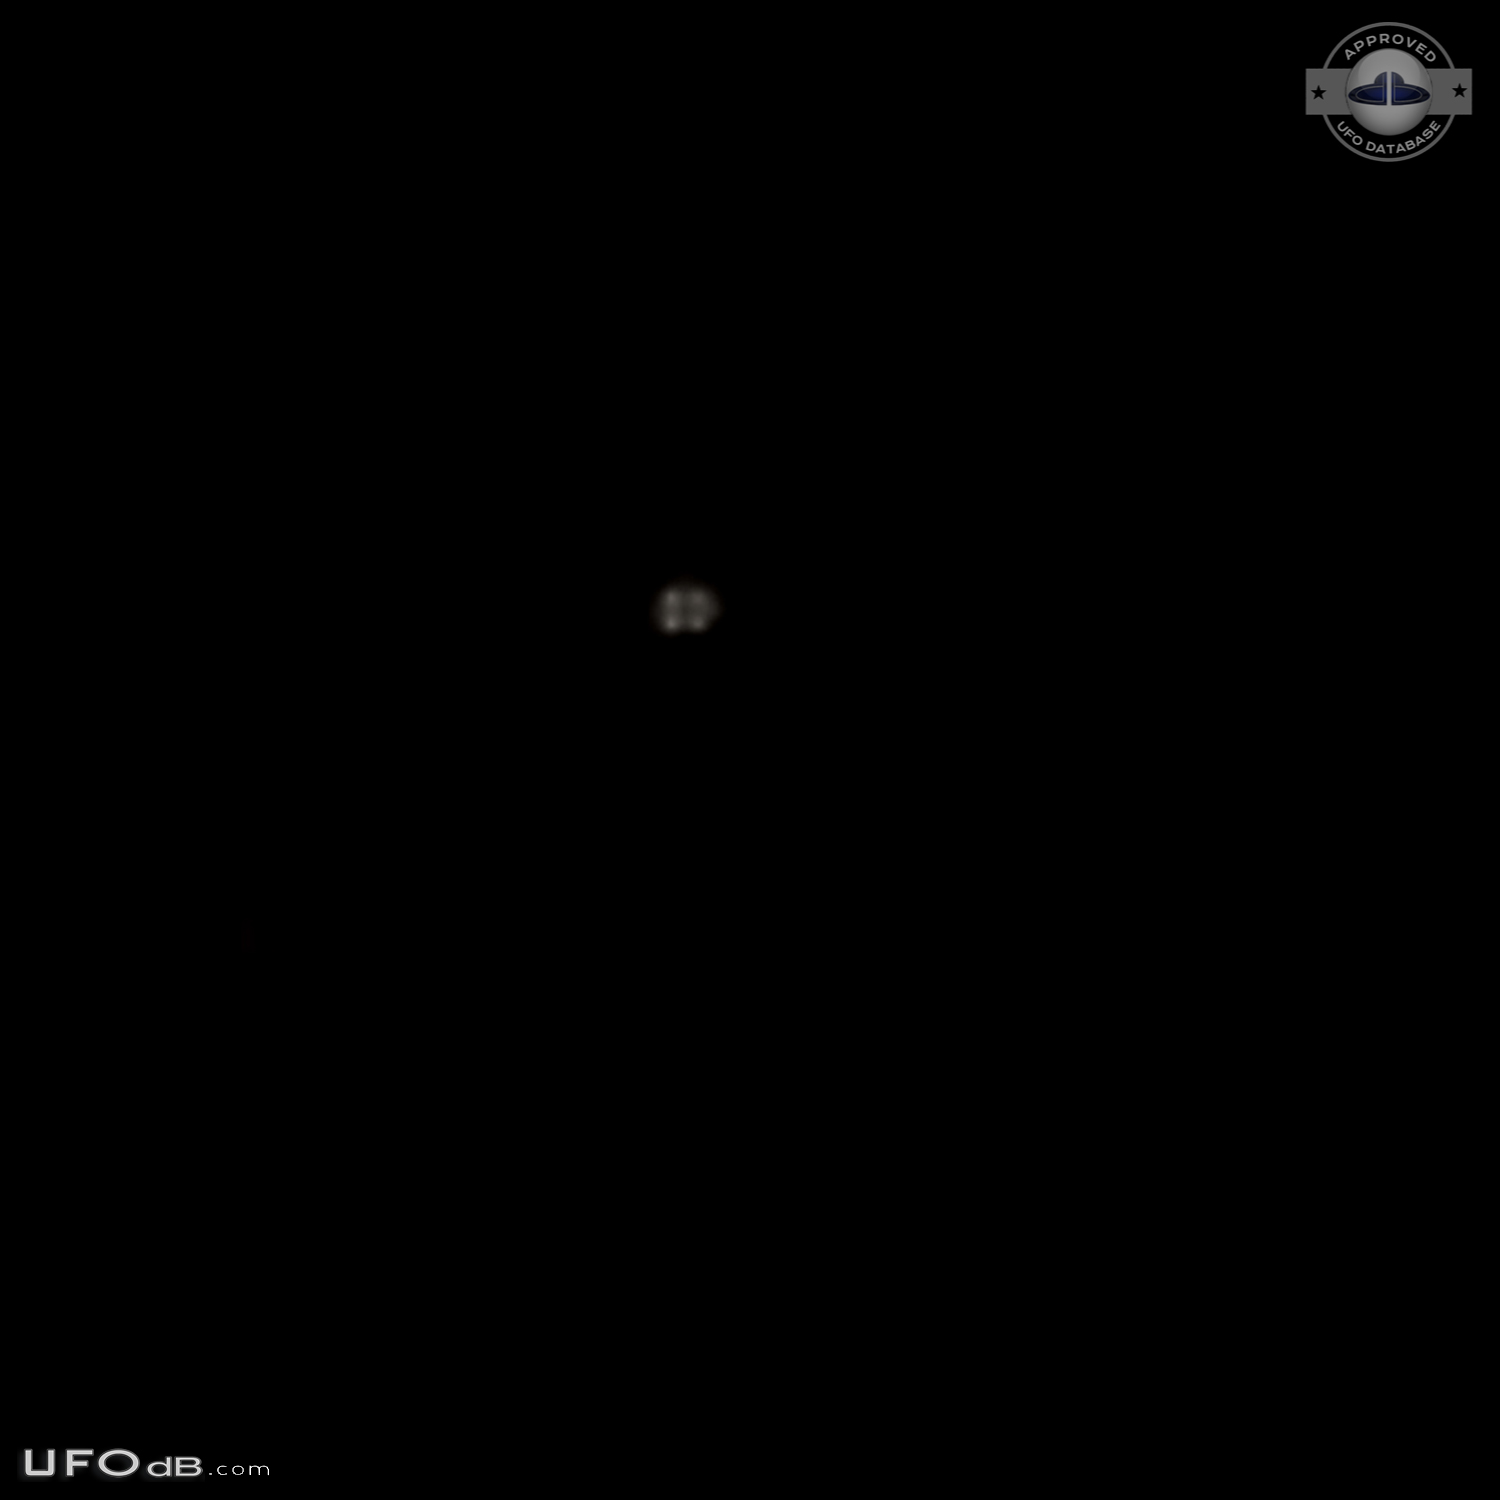 Square UFO with four thrusters fast shiny Hyderabad Telangana India UFO Picture #656-1